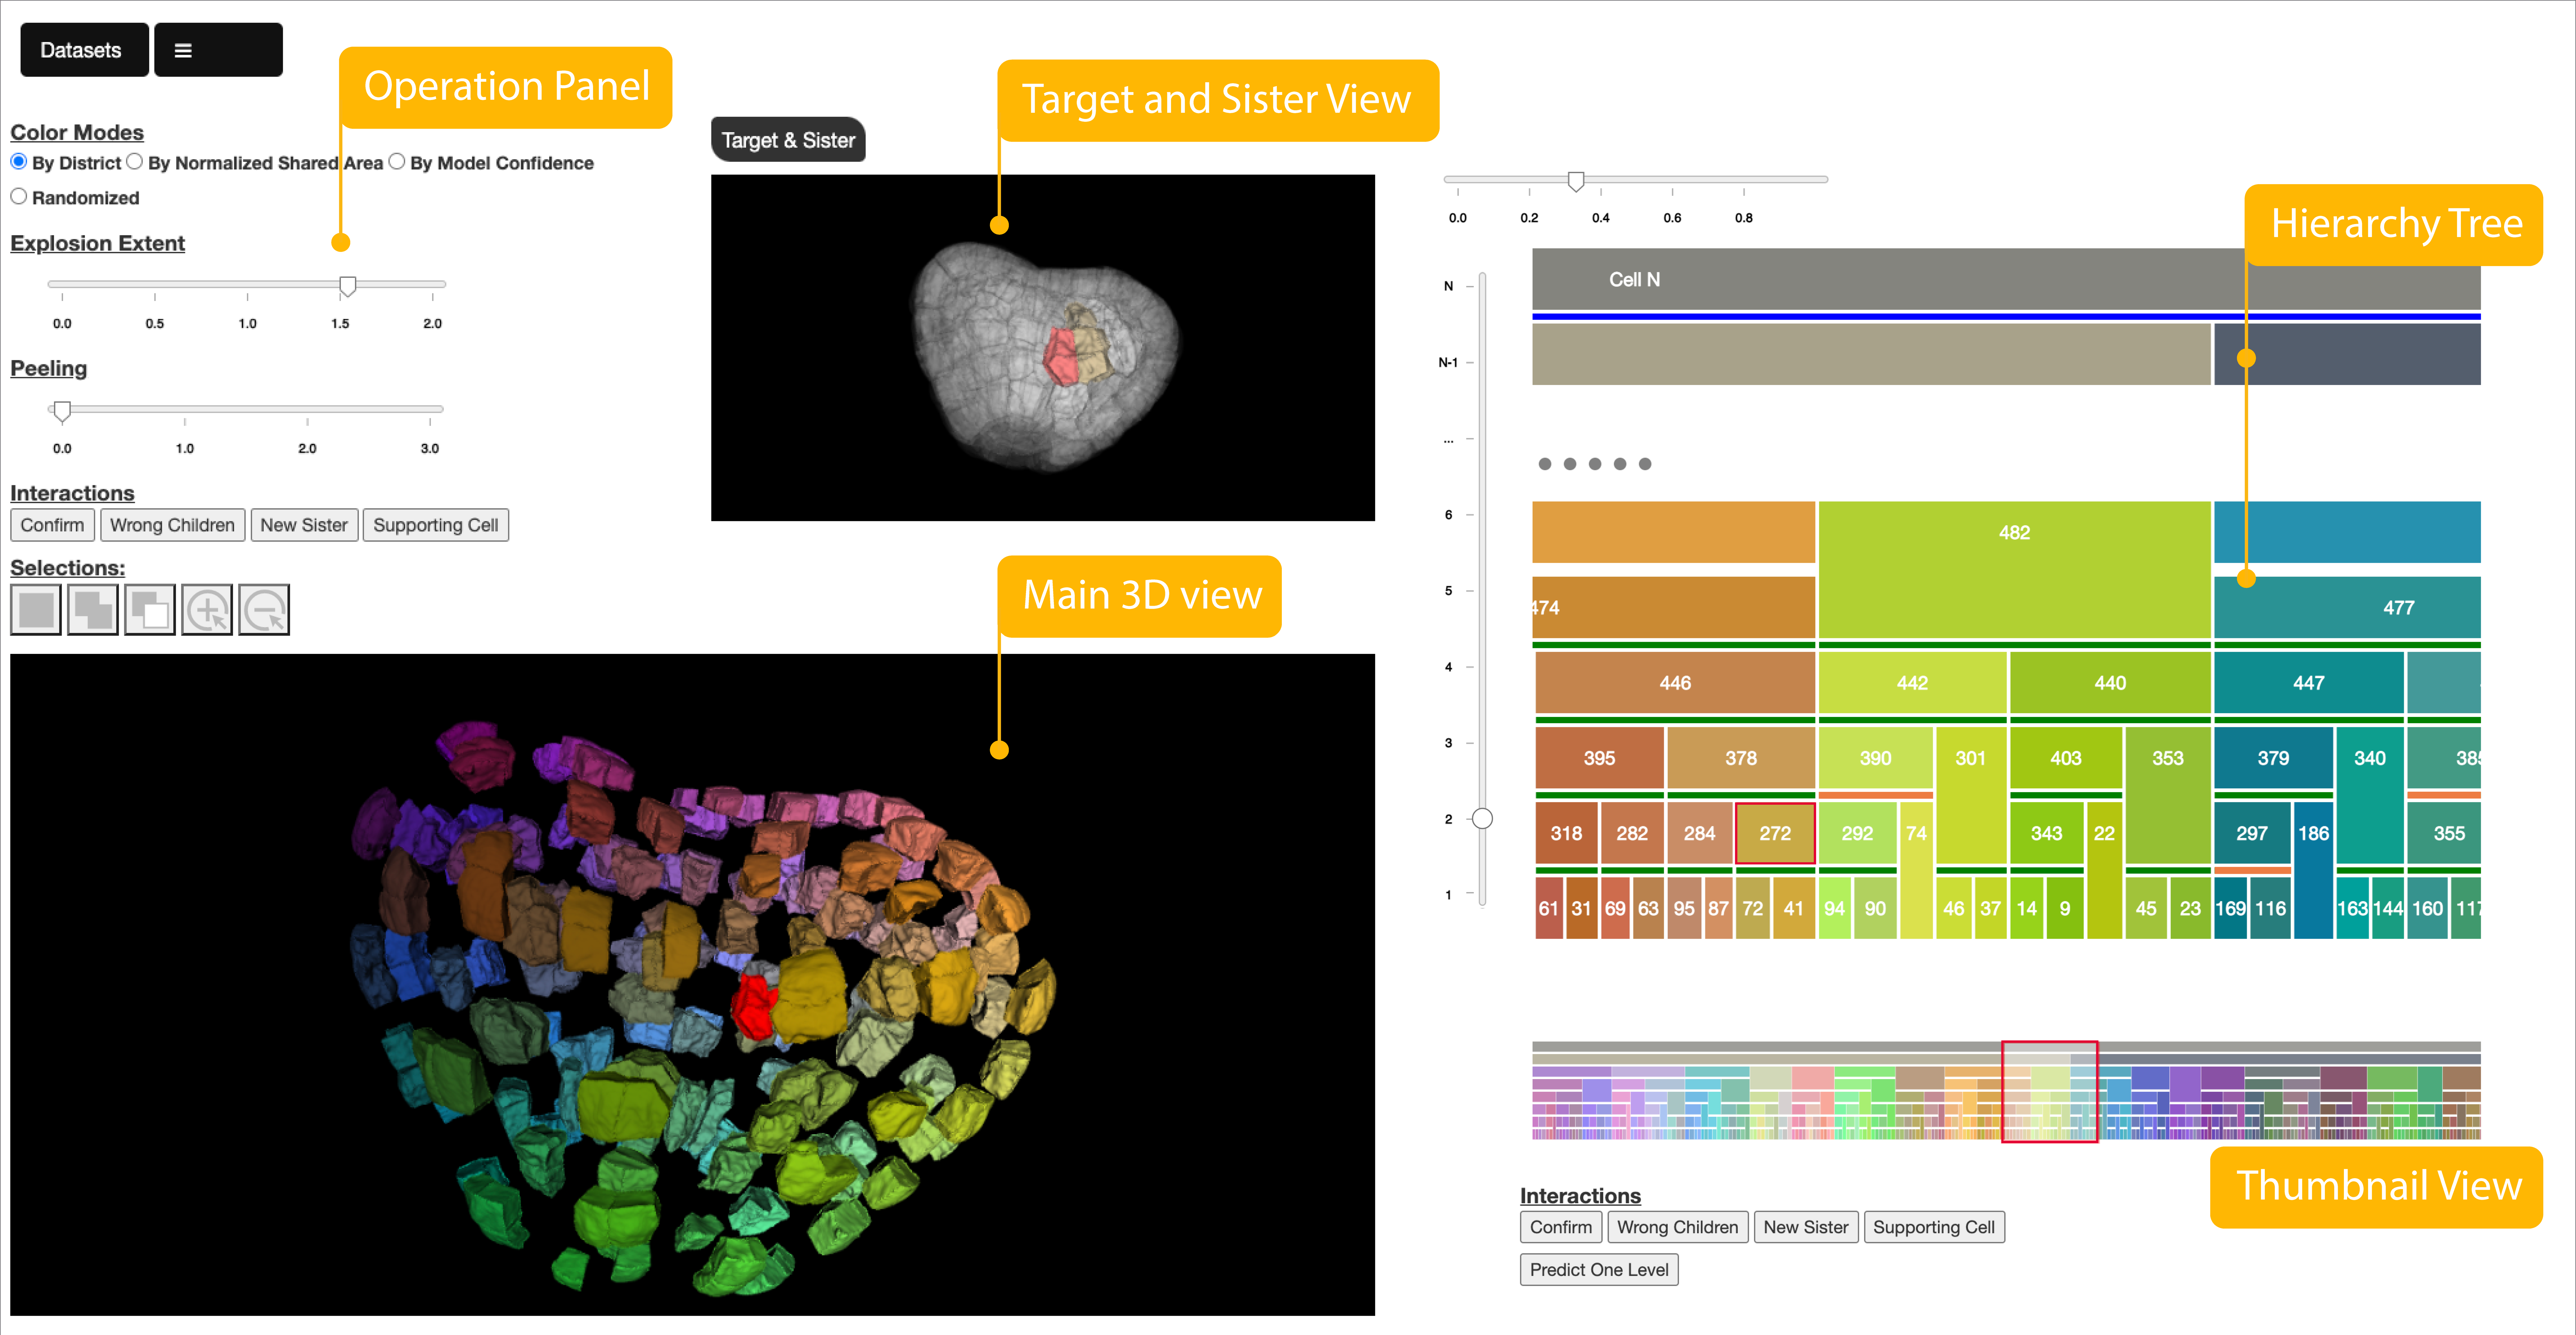 Screenshot of LineageD, for the example of assigning a 256-cell embryo (in progress). The core elements are the Main 3D View of the embryo, here exploded and with the target cell highlighted, and the Hierarchy Tree of the lineage, which is interactively established by the biologists. The Target and Sister View shows the relative position of the target cell within the whole embryo and its proposed sister. The Thumbnail View of the tree provides the context of the full hierarchy. Finally, the Operation Panel supports further control of the tool.